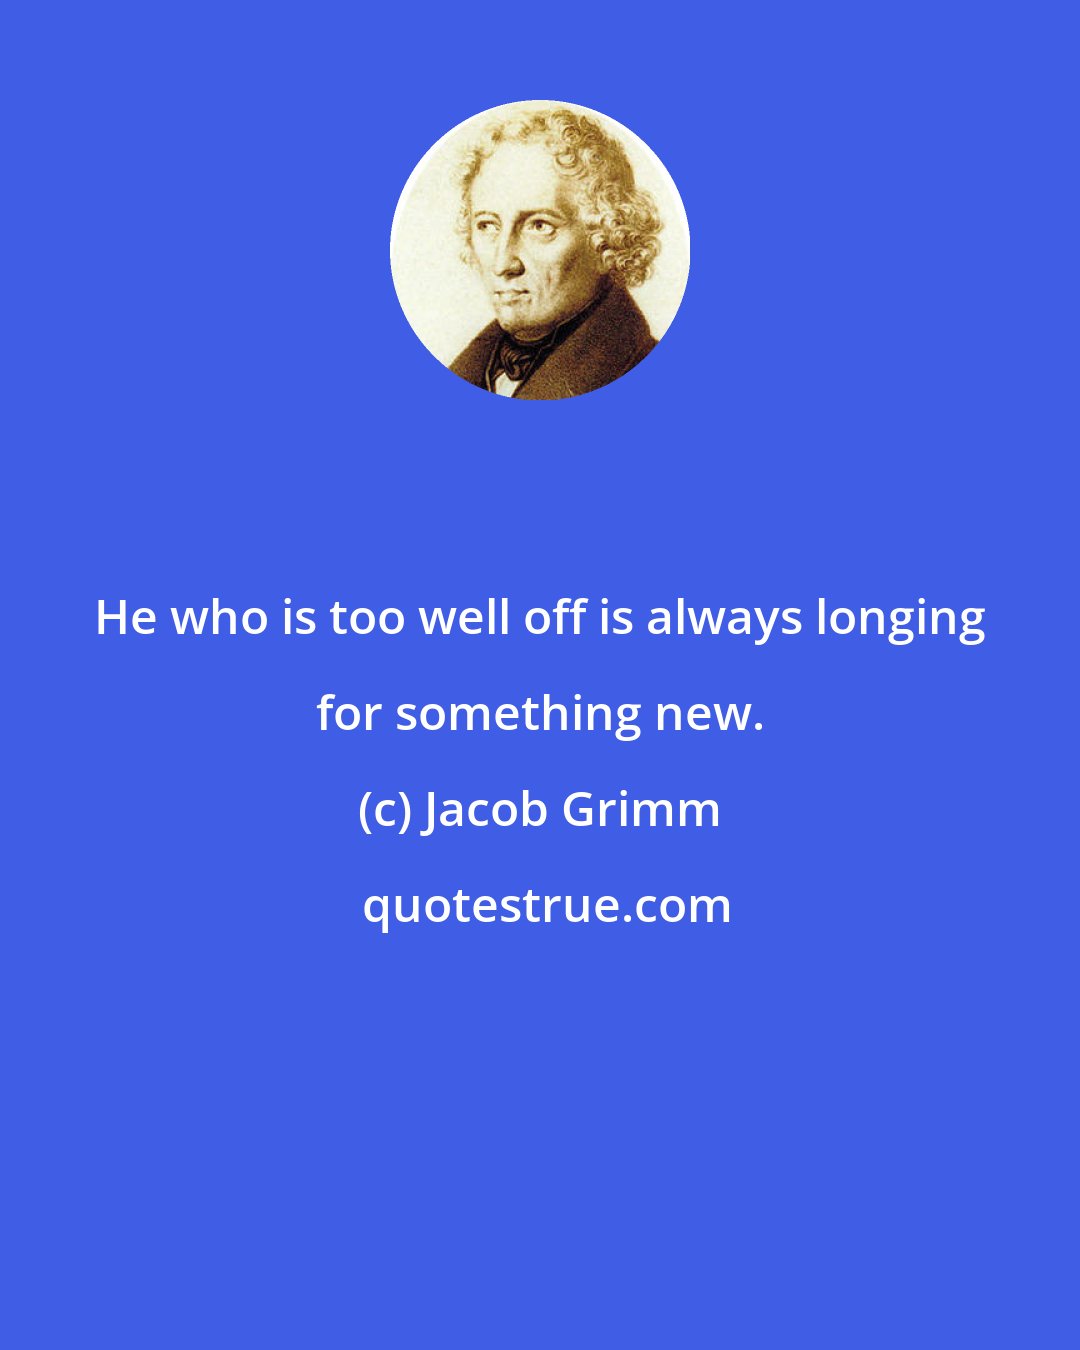 Jacob Grimm: He who is too well off is always longing for something new.